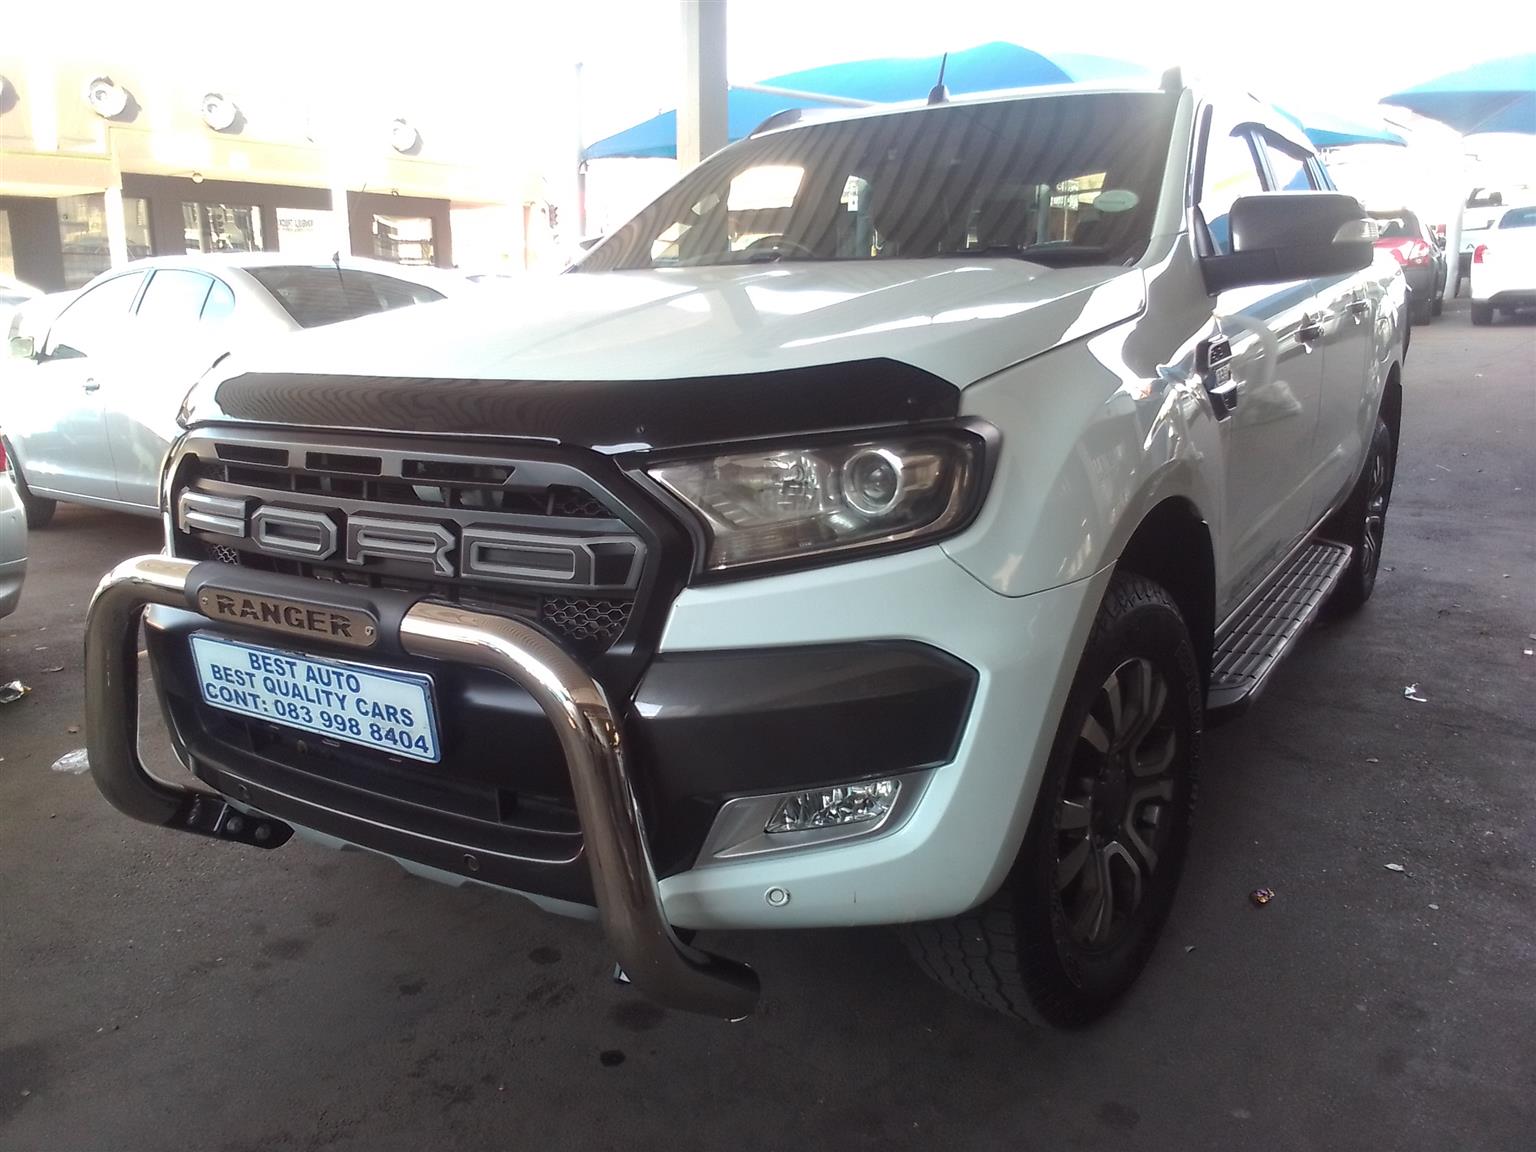 2016 Ford Ranger 3.2 Engine Capacity Wild-track Double cab with Automatic Transm